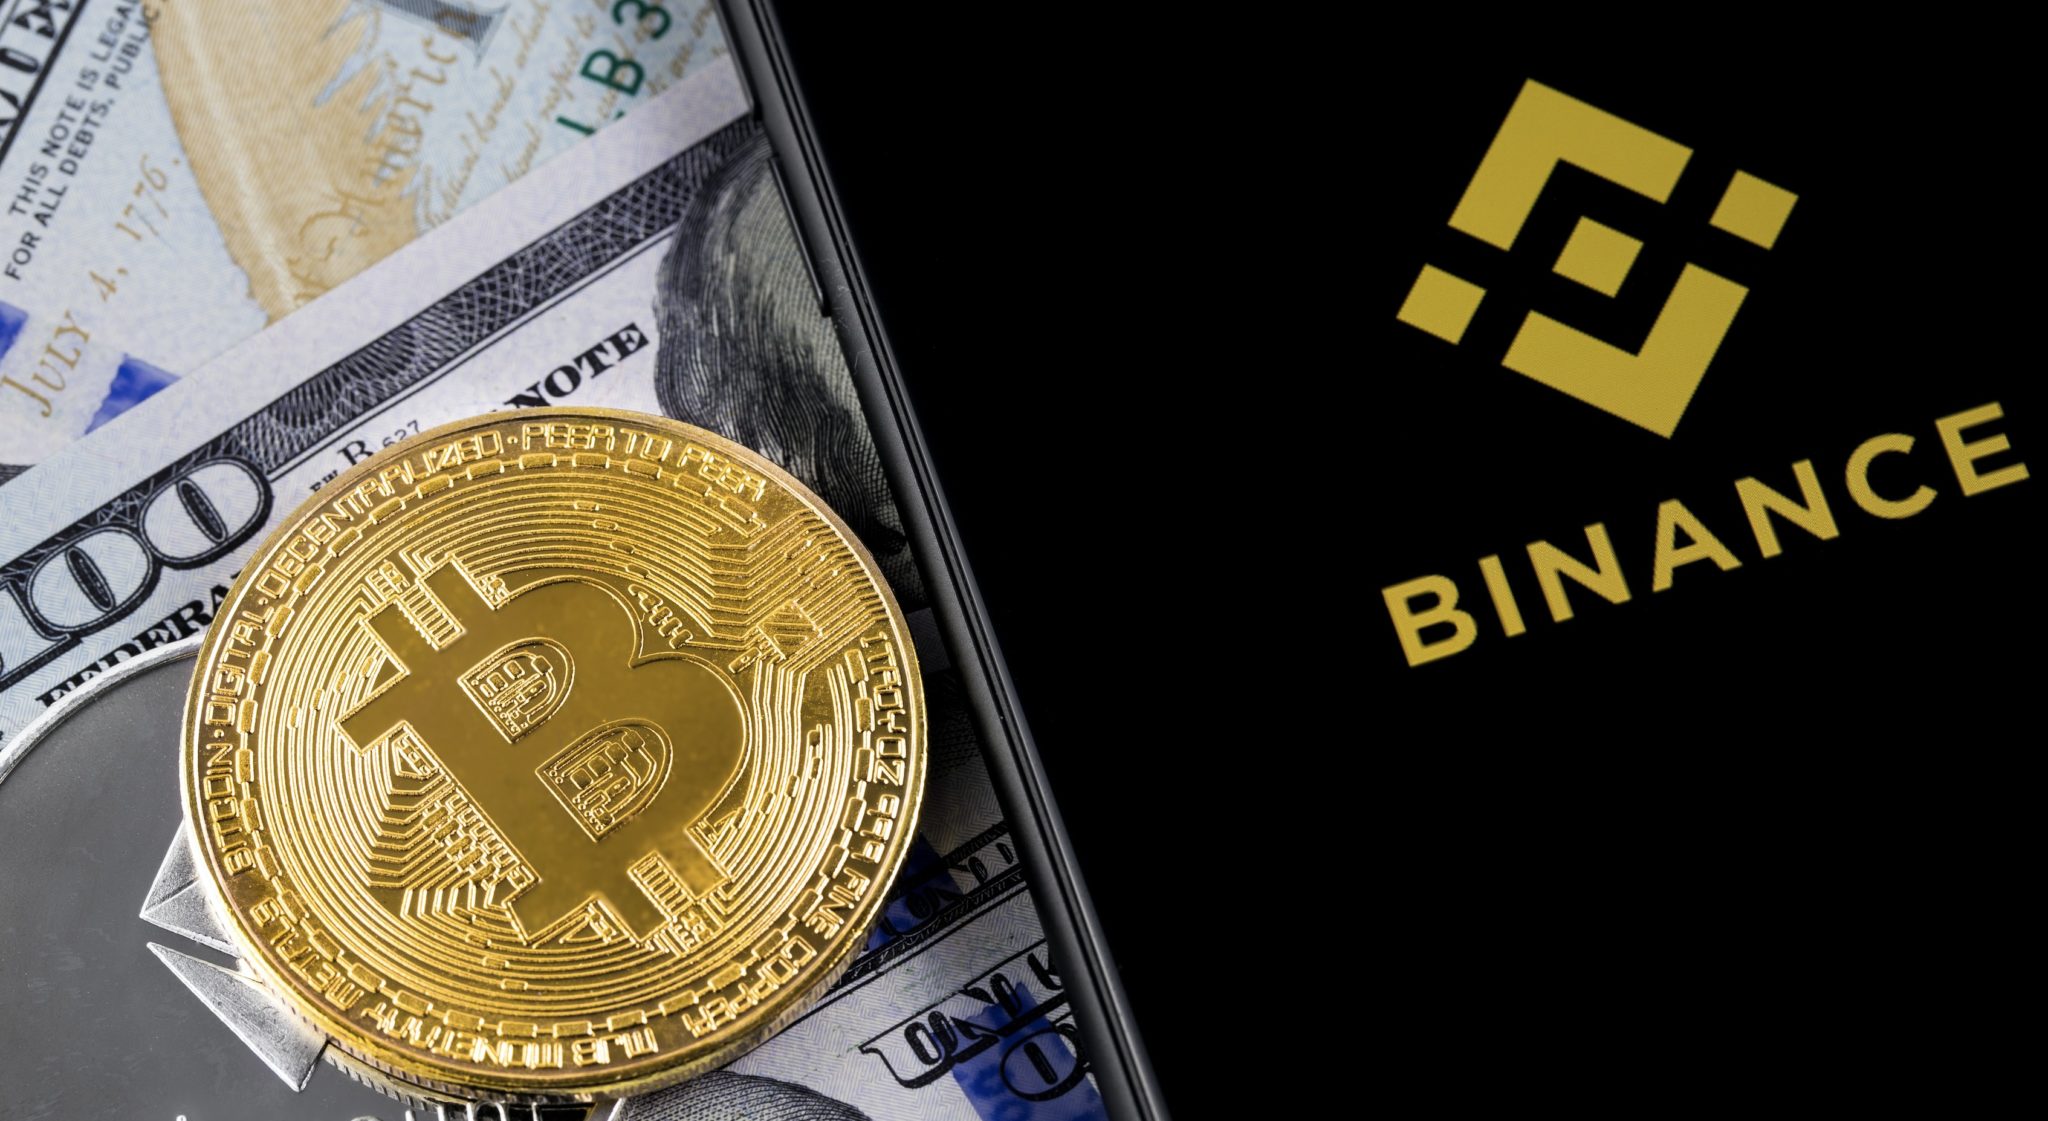 Binance Delisting Byteccoin, CHAT, Iconomi and Triggers